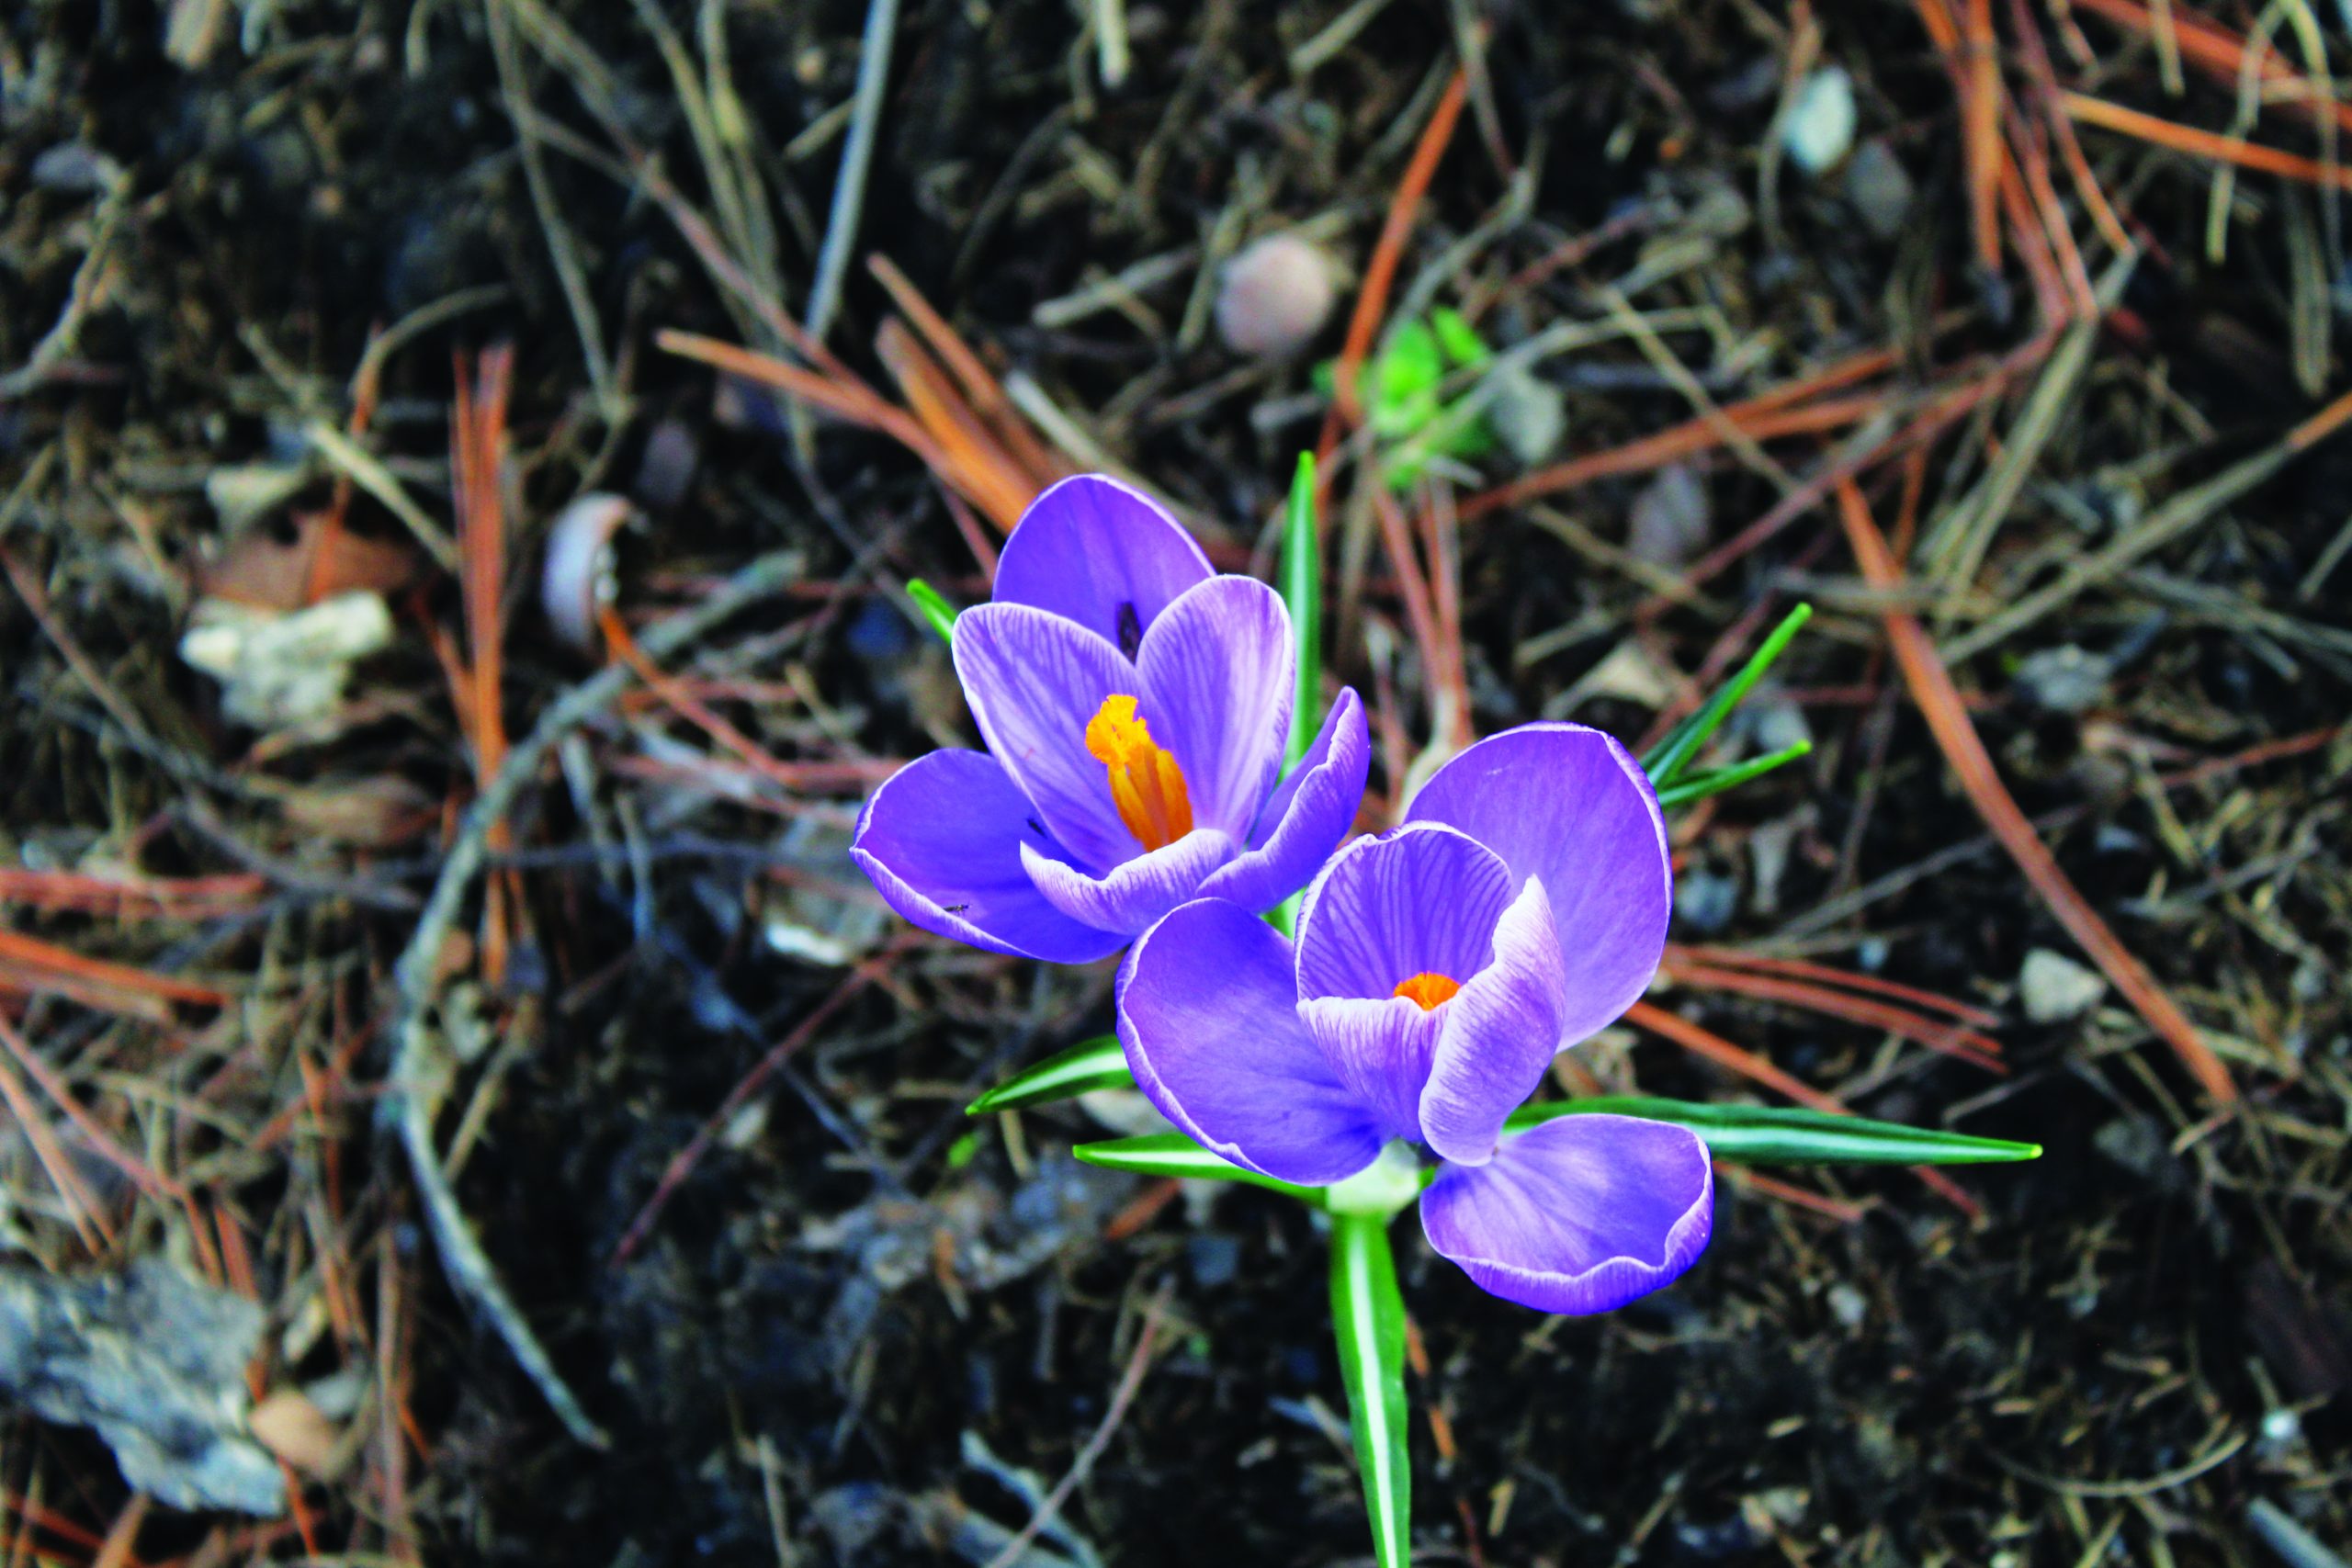 Planting Bulbs in Fall for Early Spring Flowers